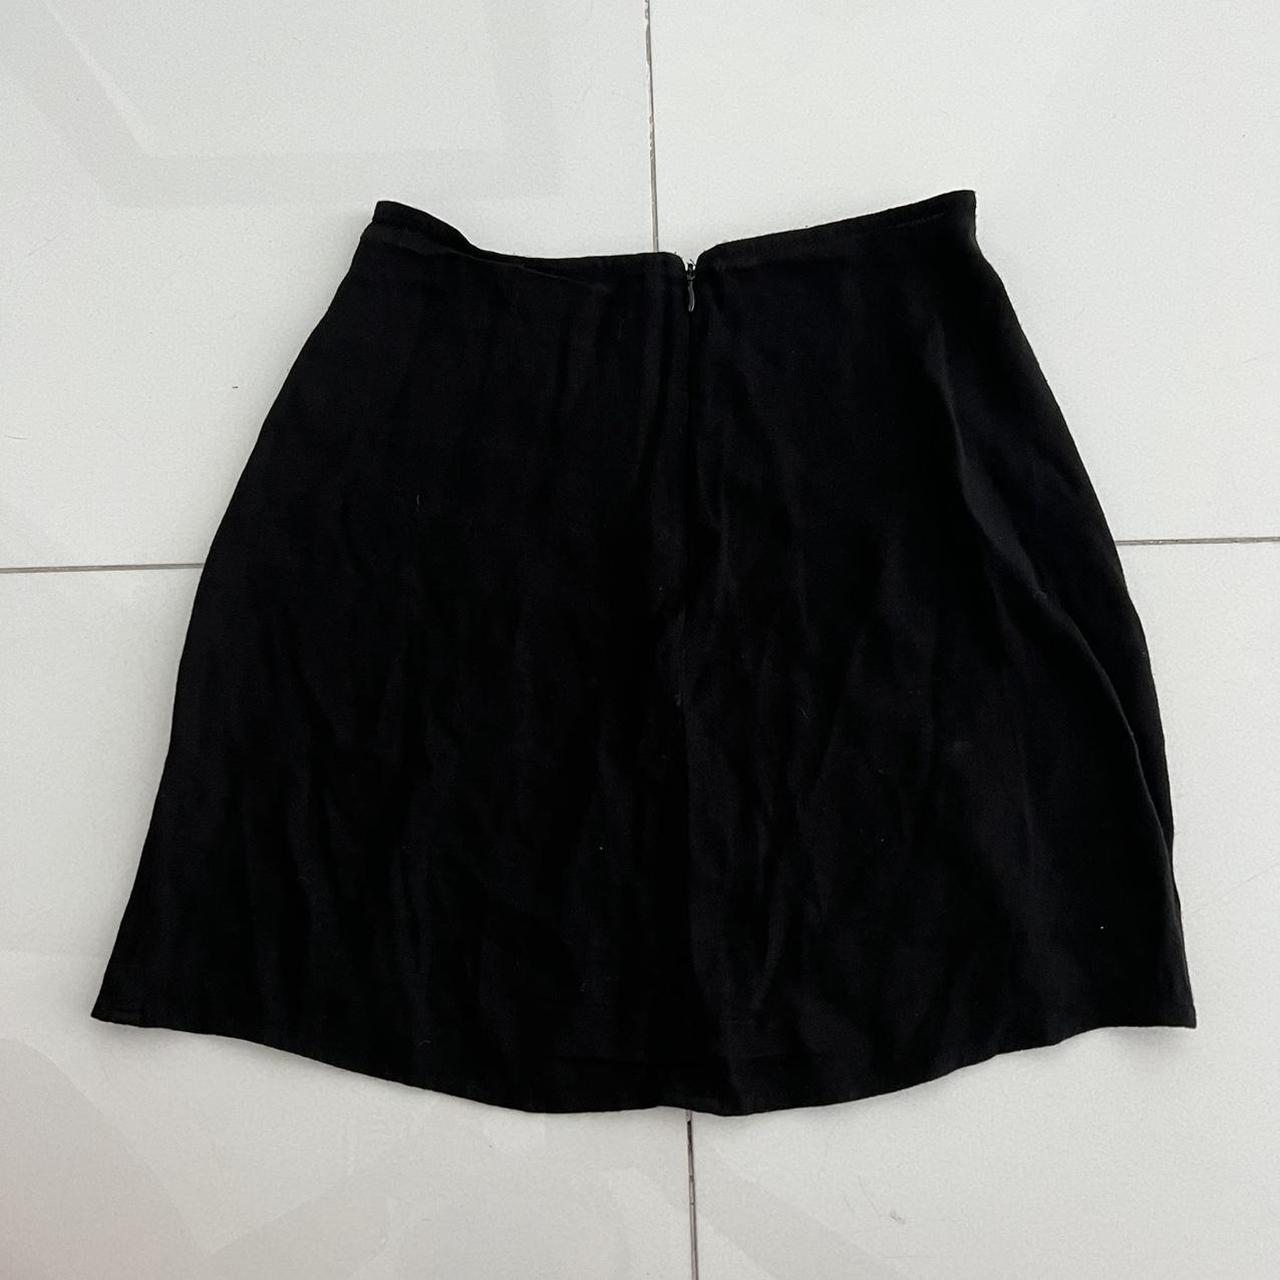 Product Image 3 - Reformation black linen skirt
Size: 4
Price: